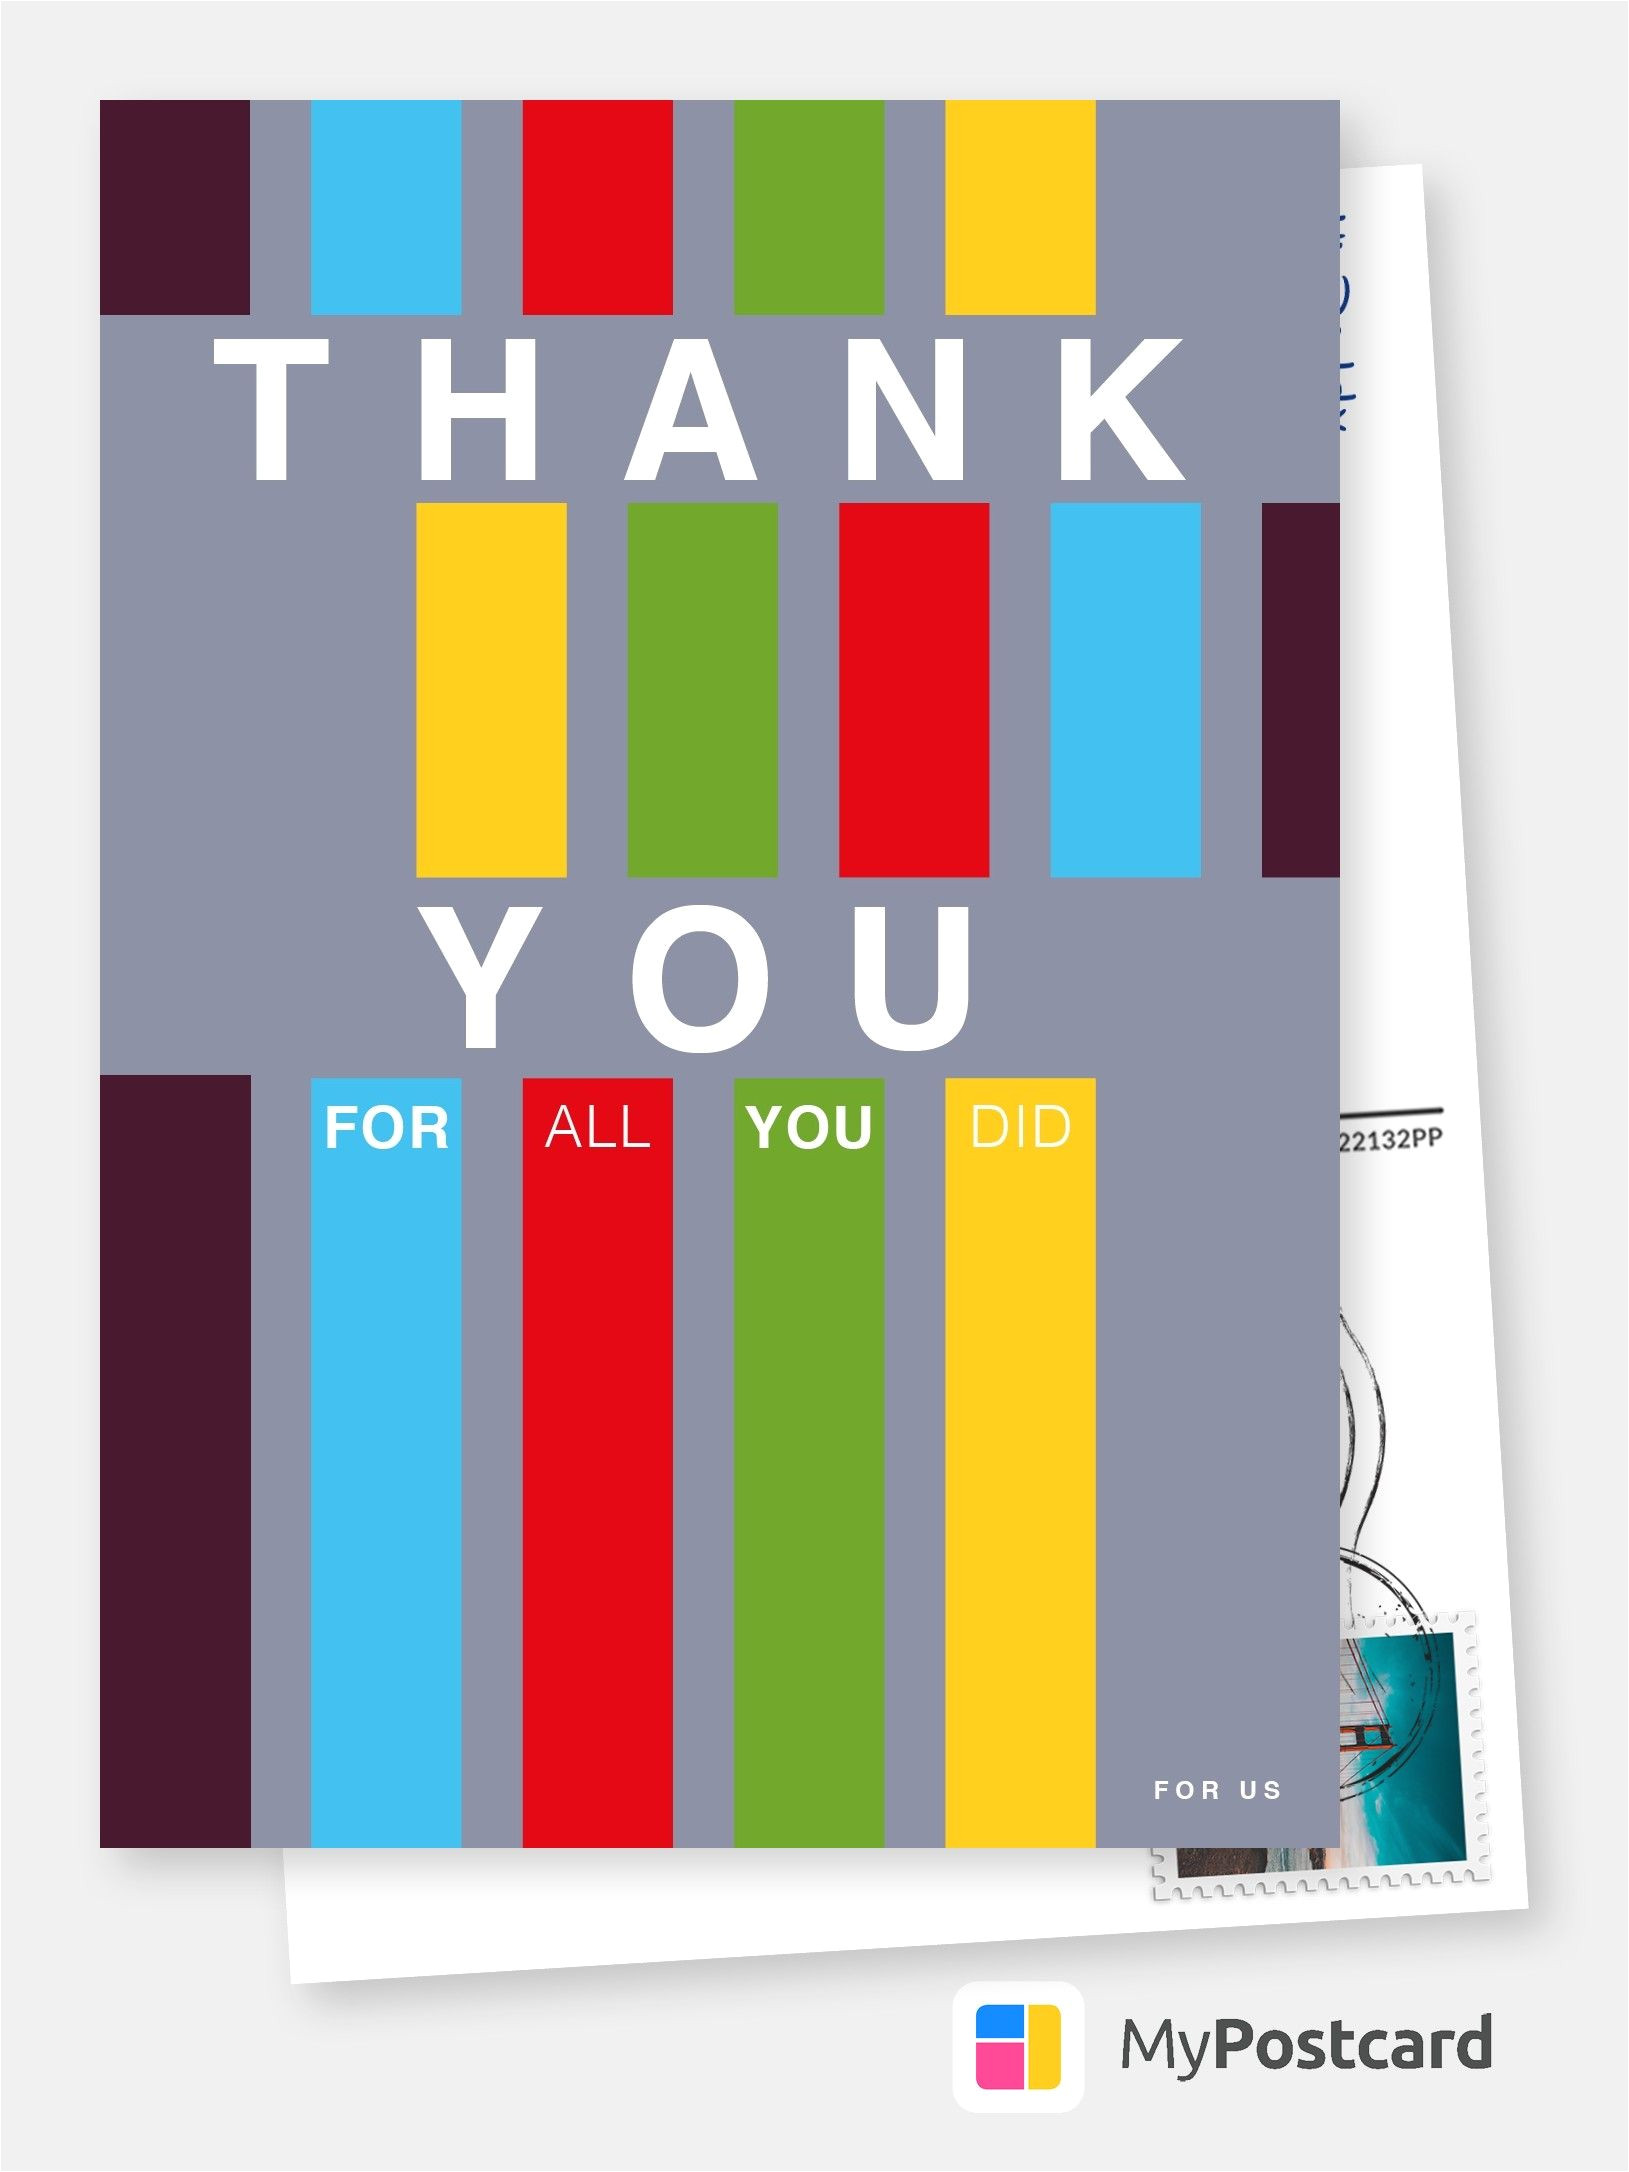 Greeting Card Thank You Messages Thank You for All You Did Ermutigungskarten Spruche